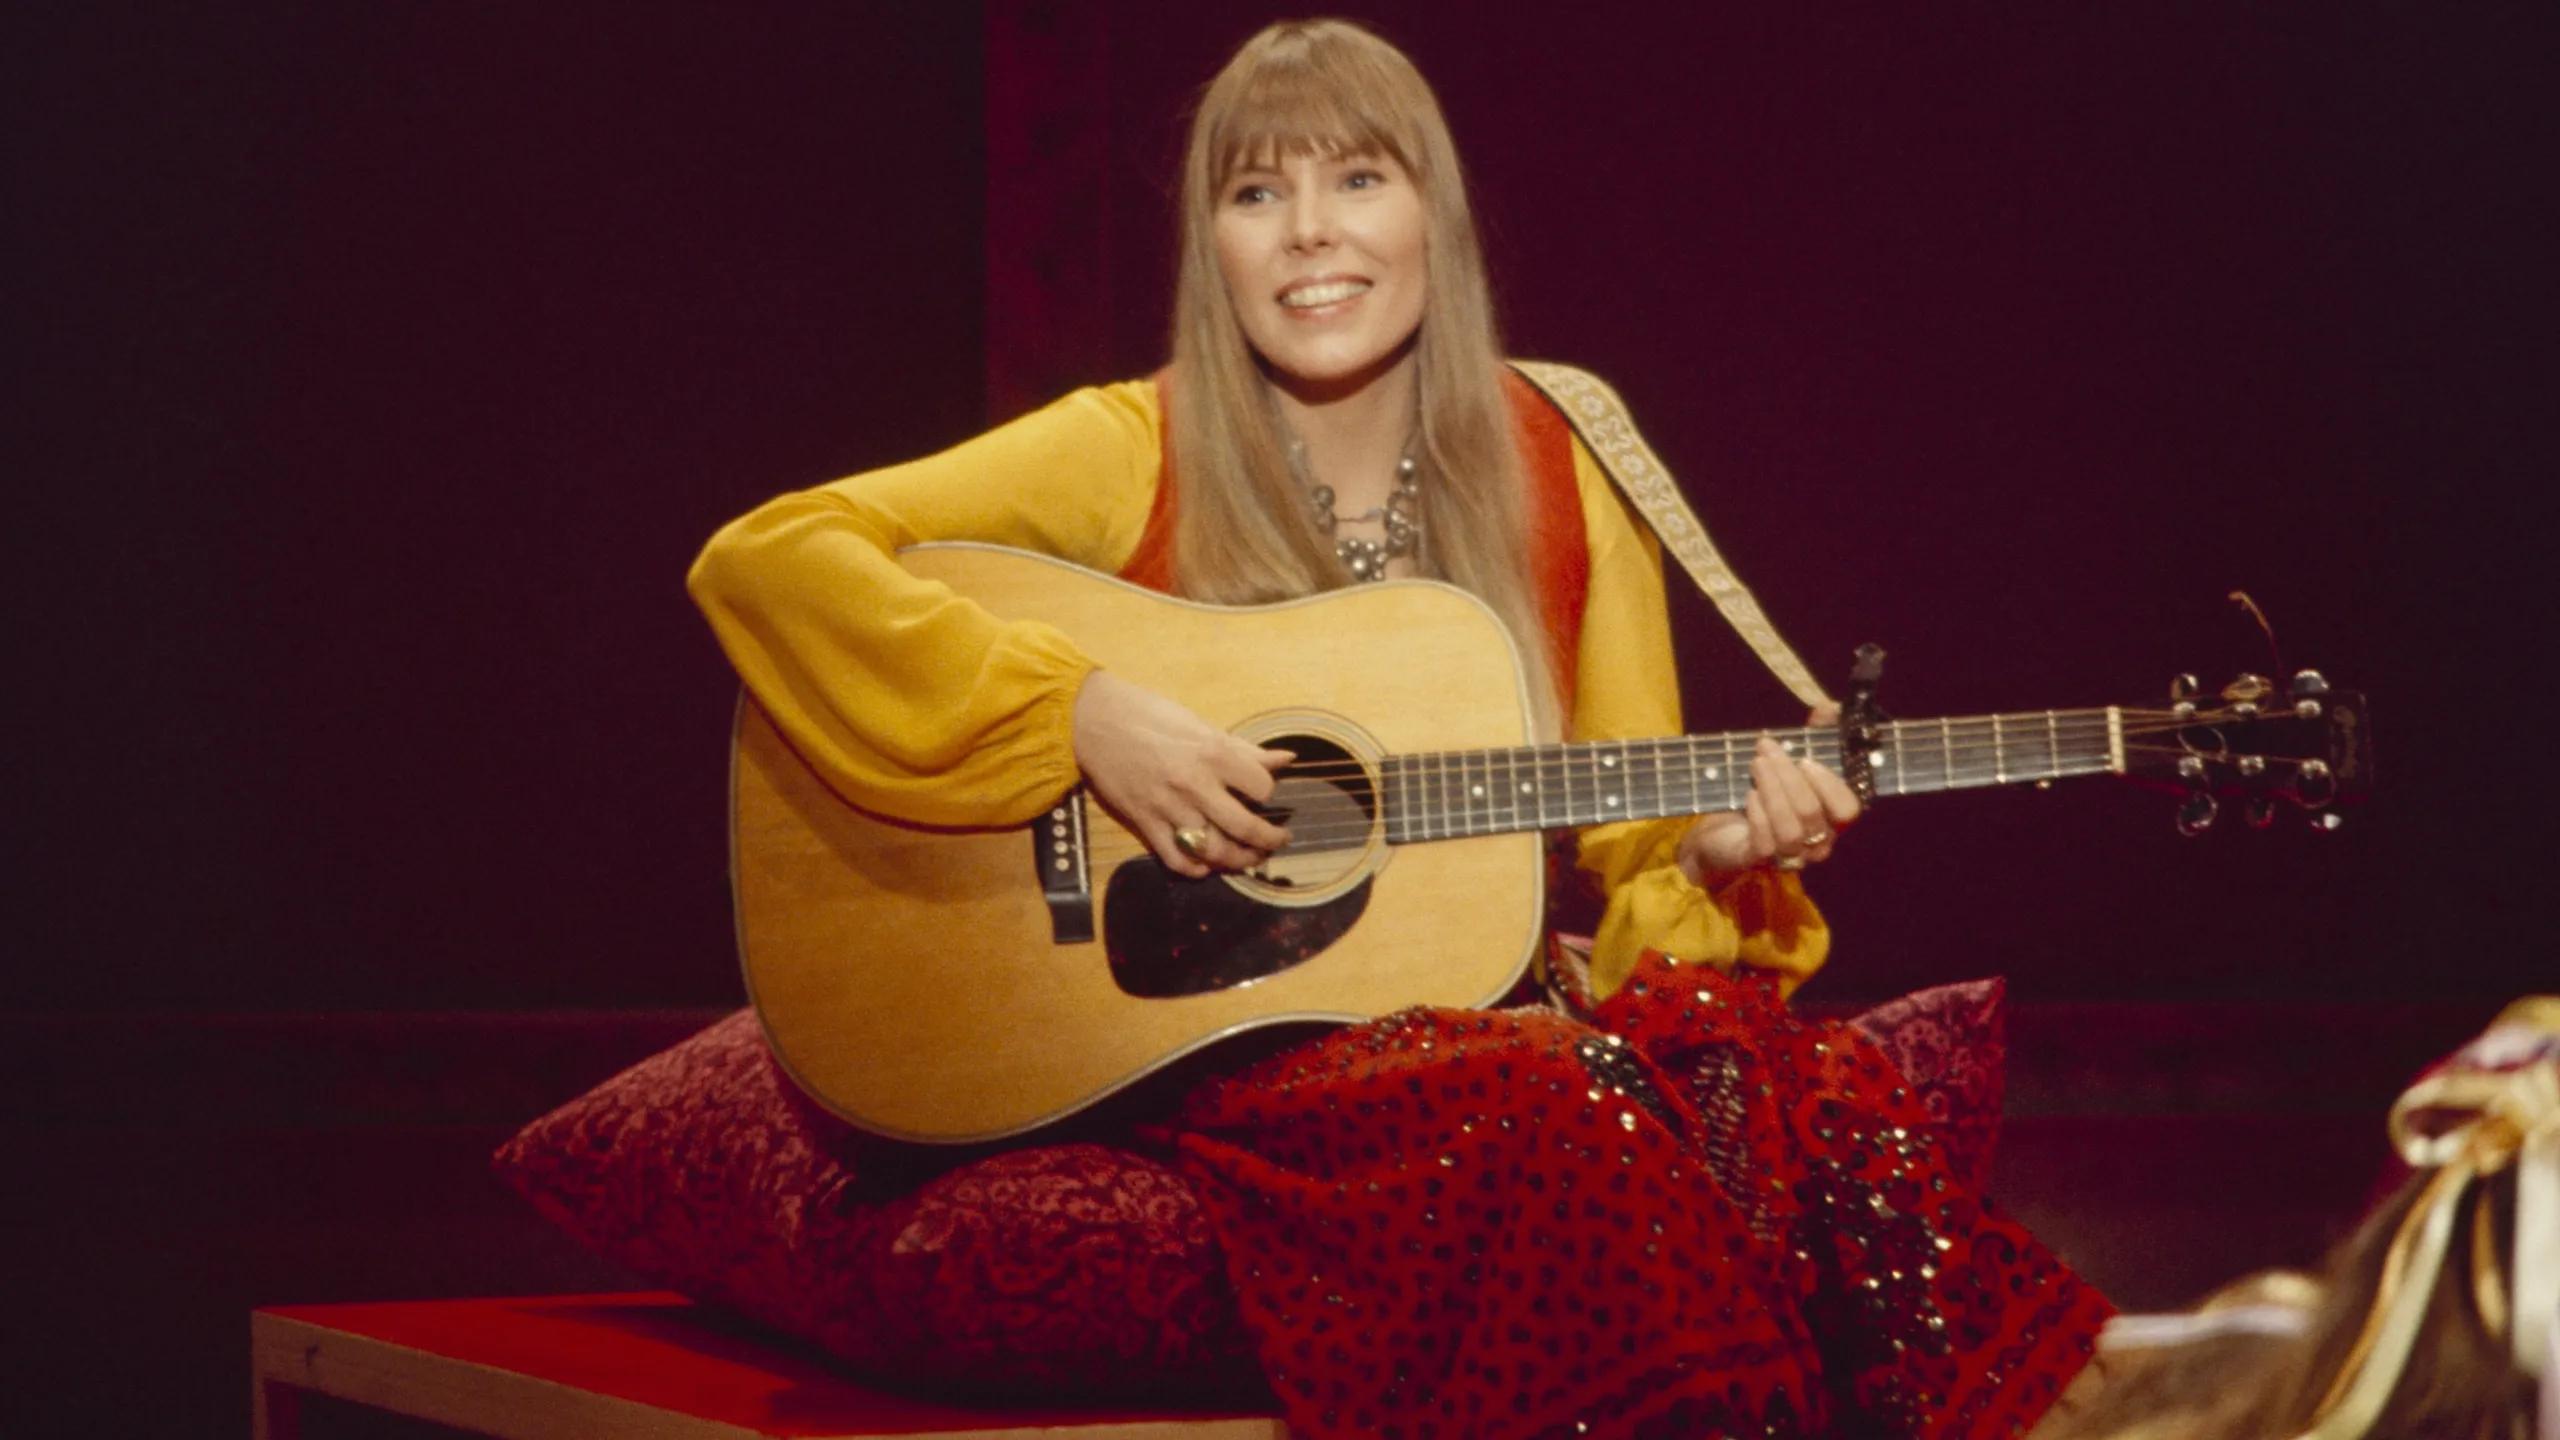 How was Joni Mitchell introduced to singing